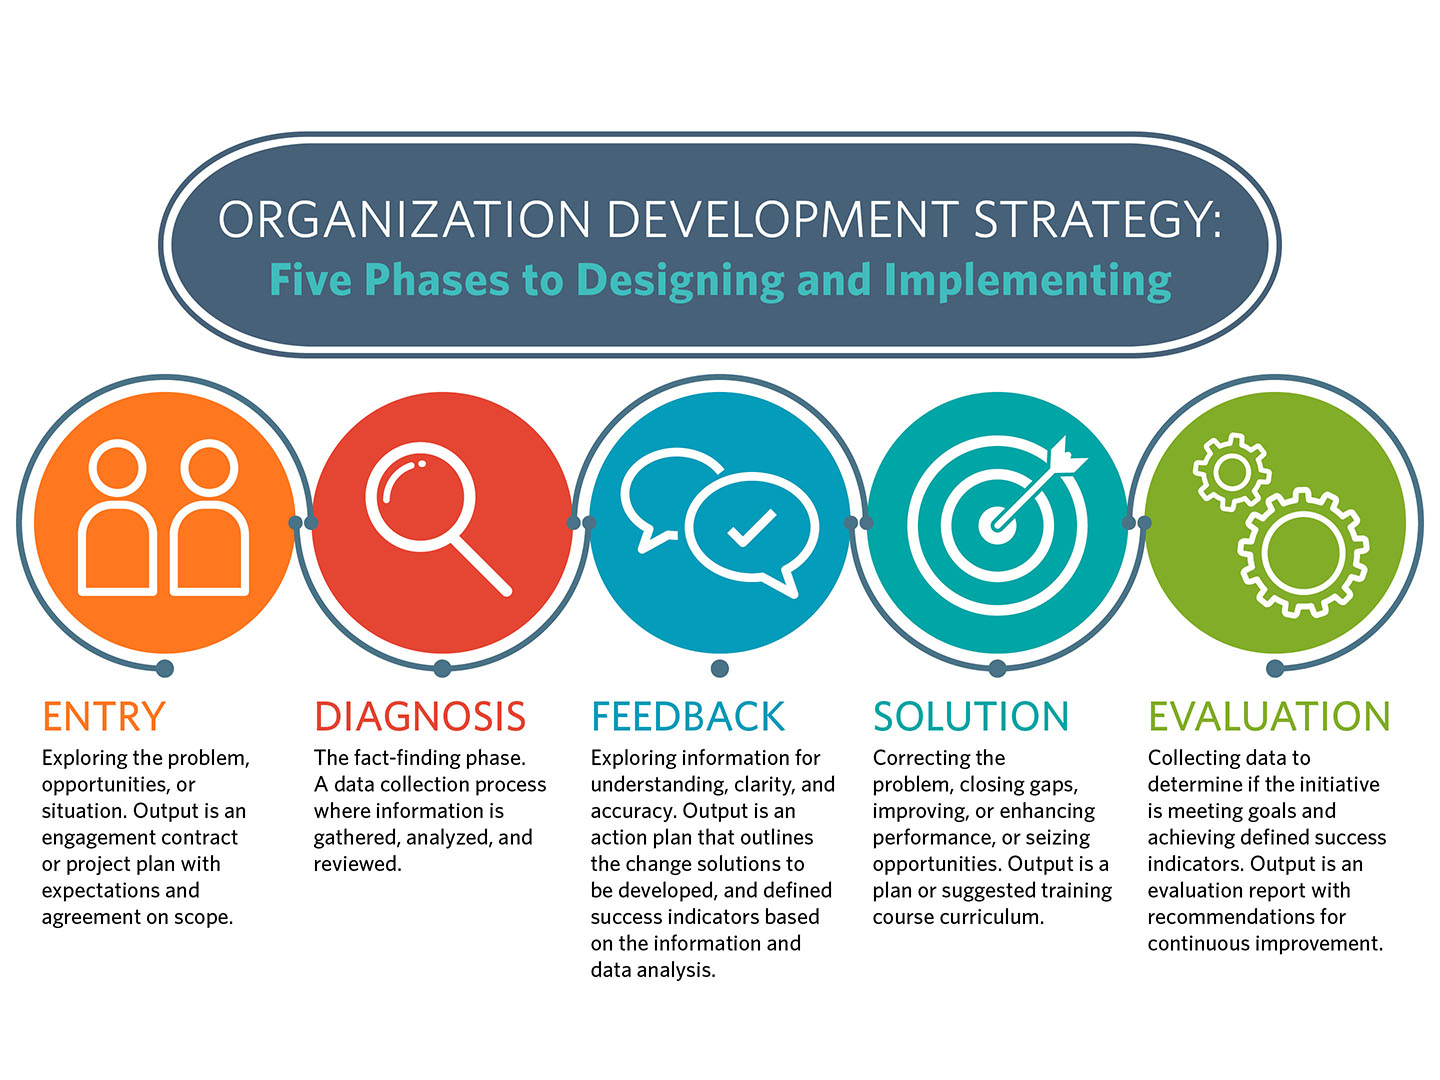 organization development strategy - 5 phases to designing and implementing